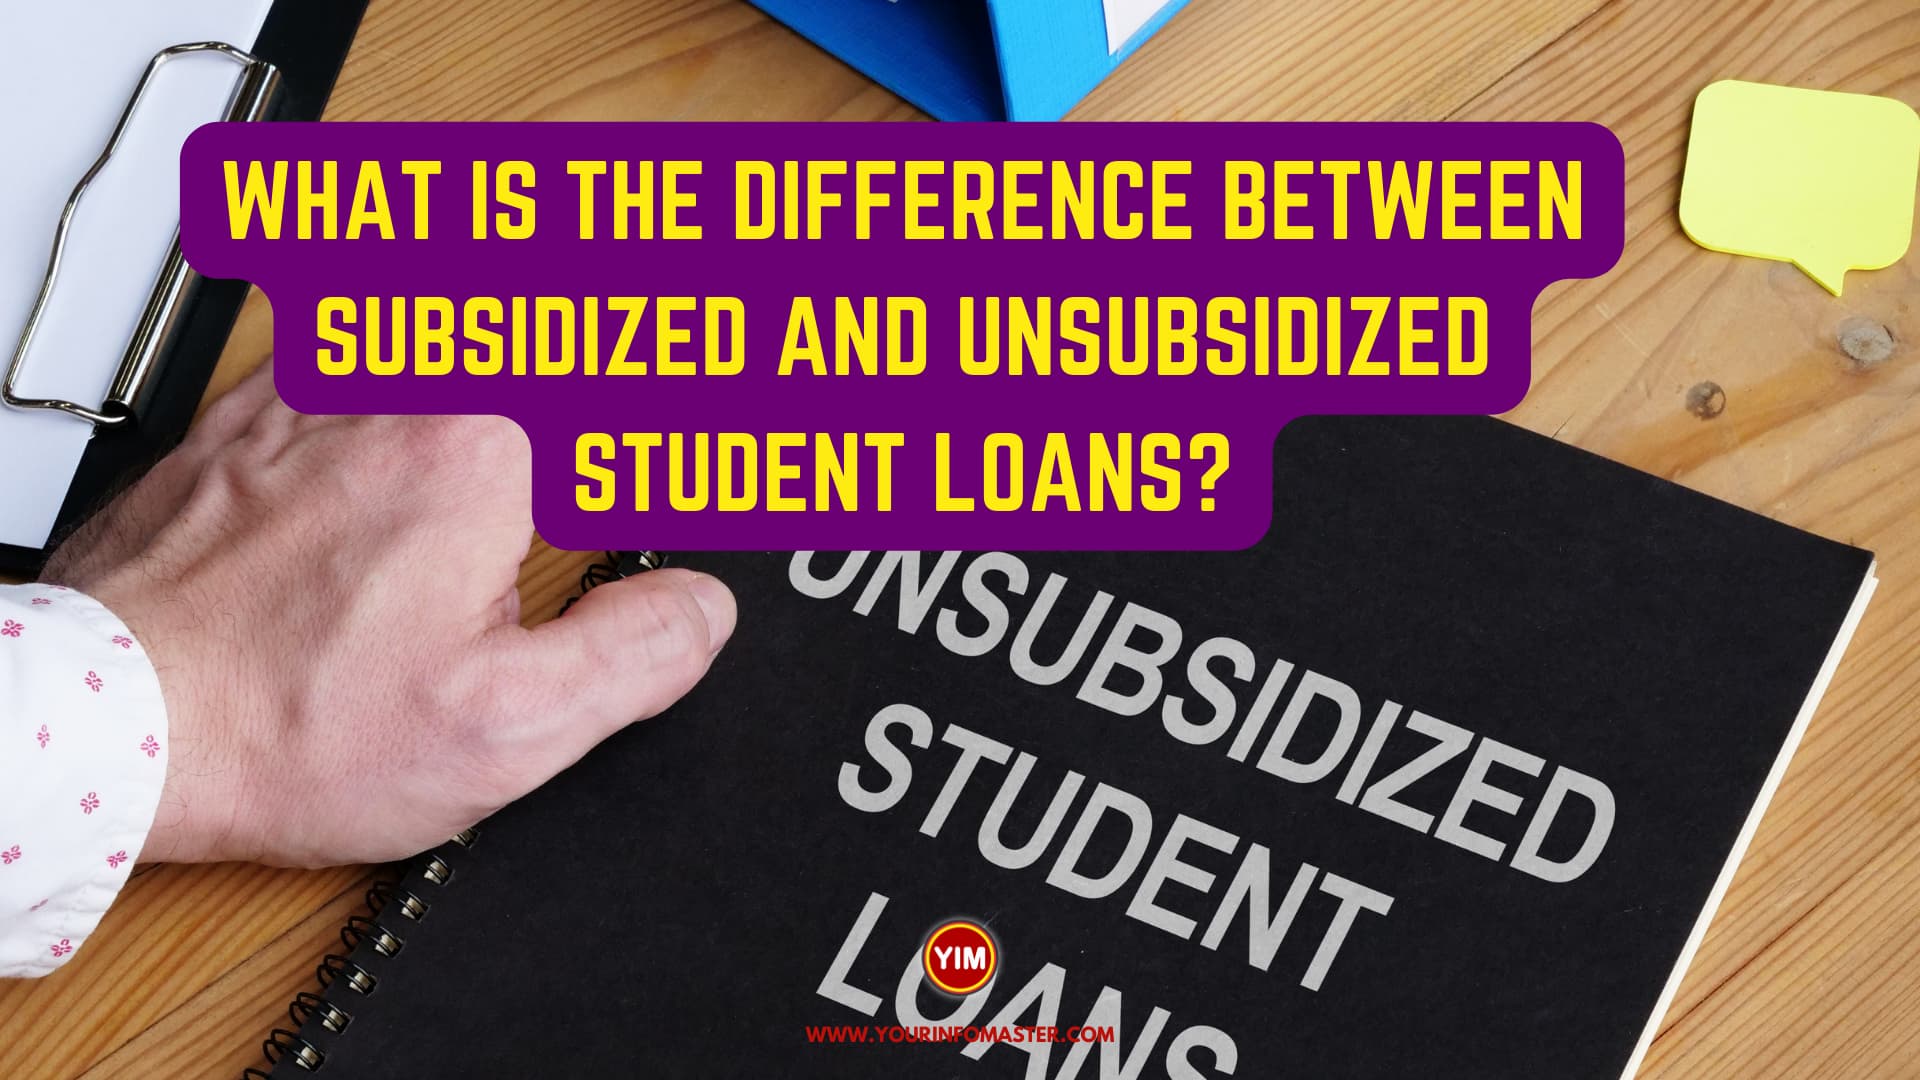 What is the difference between Subsidized and Unsubsidized Student Loans